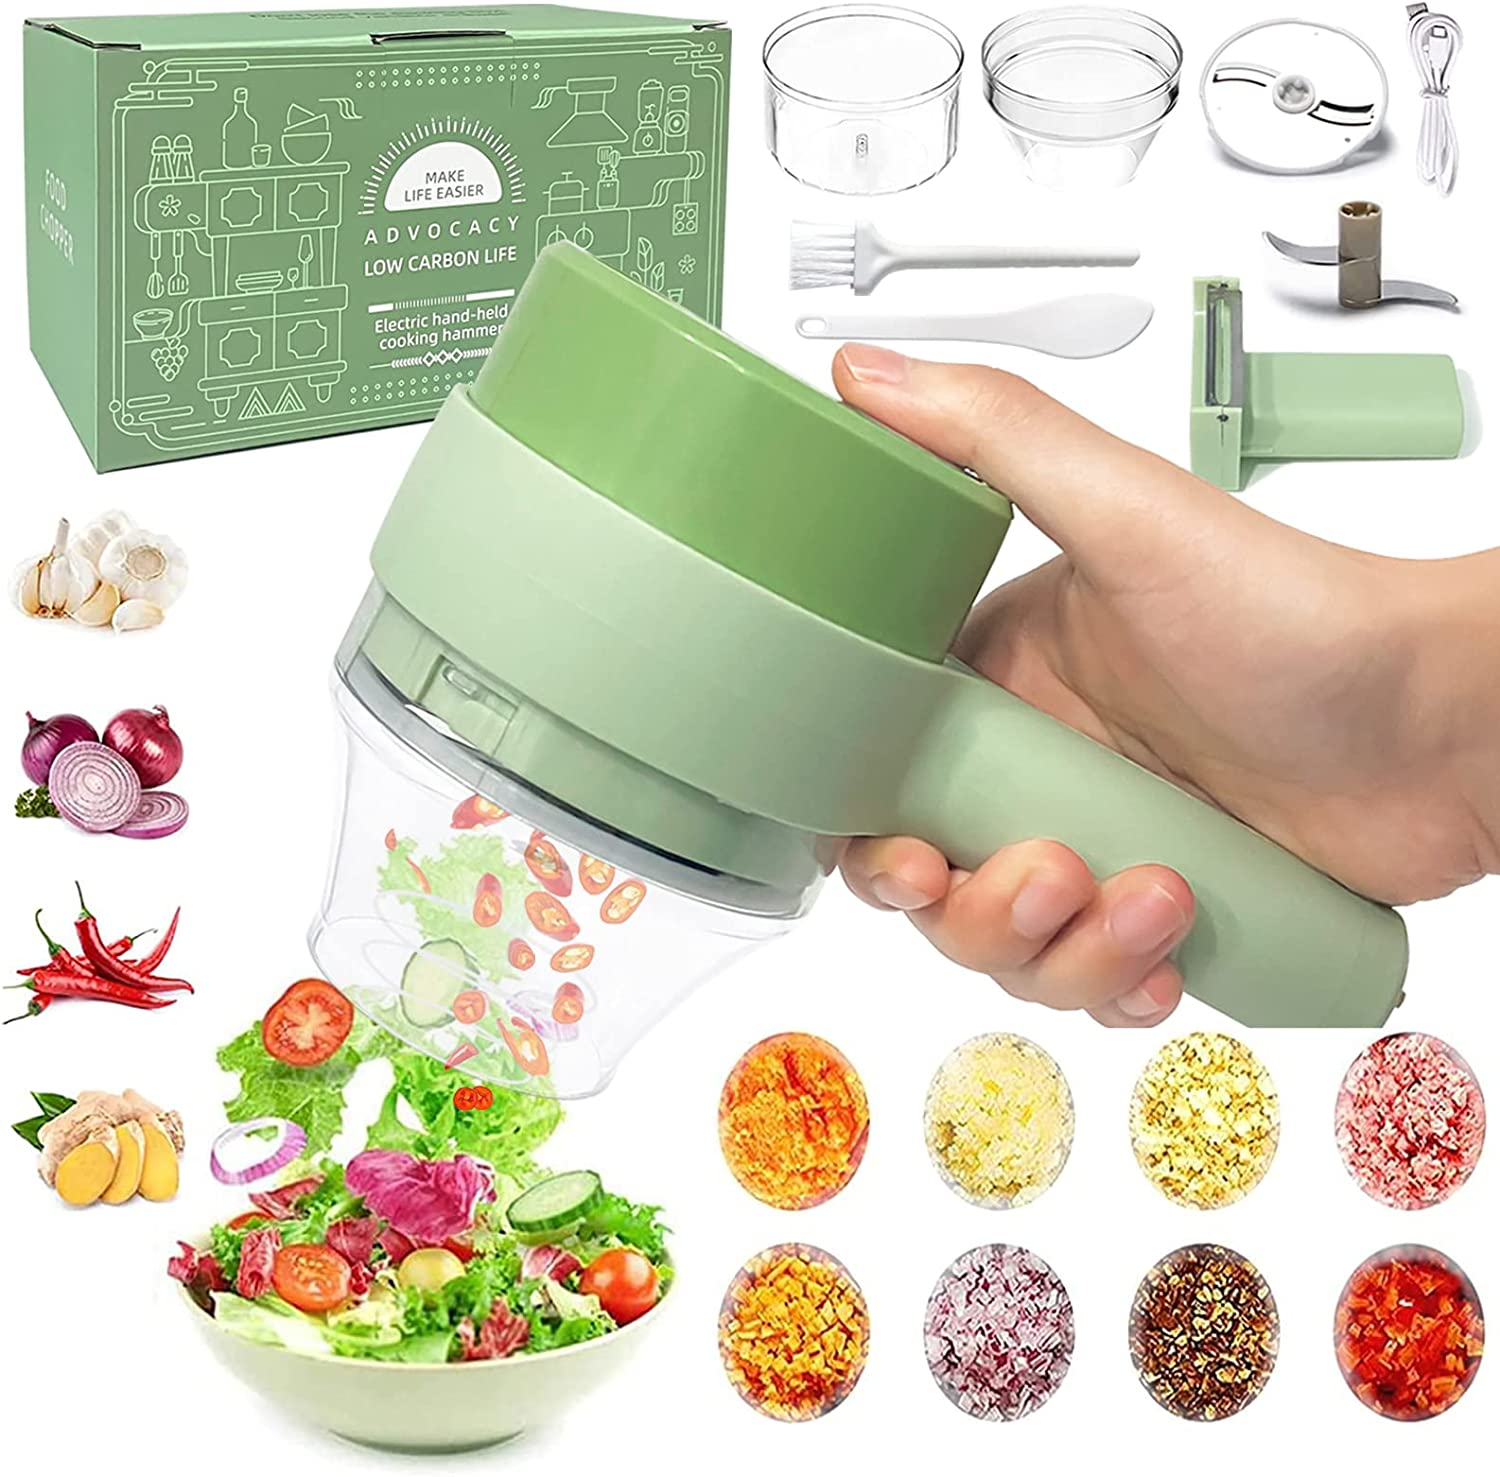 4 in 1 Portable Electric Handheld Cooking Vegetable Cutter Set